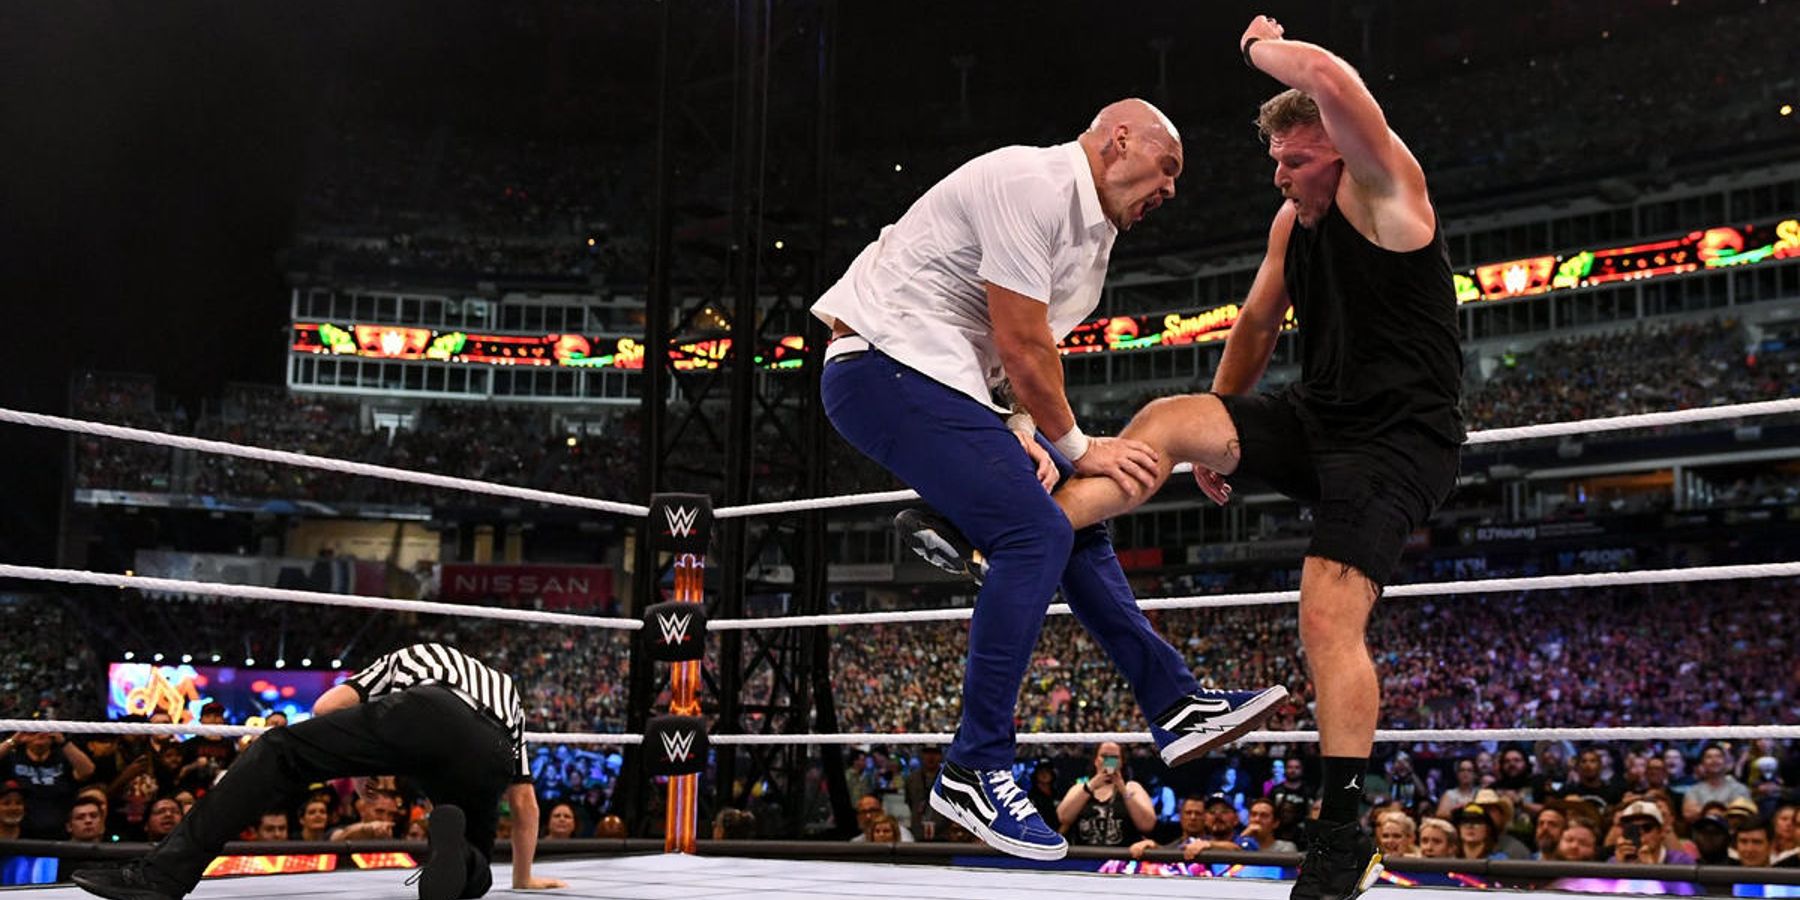 Pat McAfee punts Happy Corbin in the nether regions to finish off their match at WWE SummerSlam.